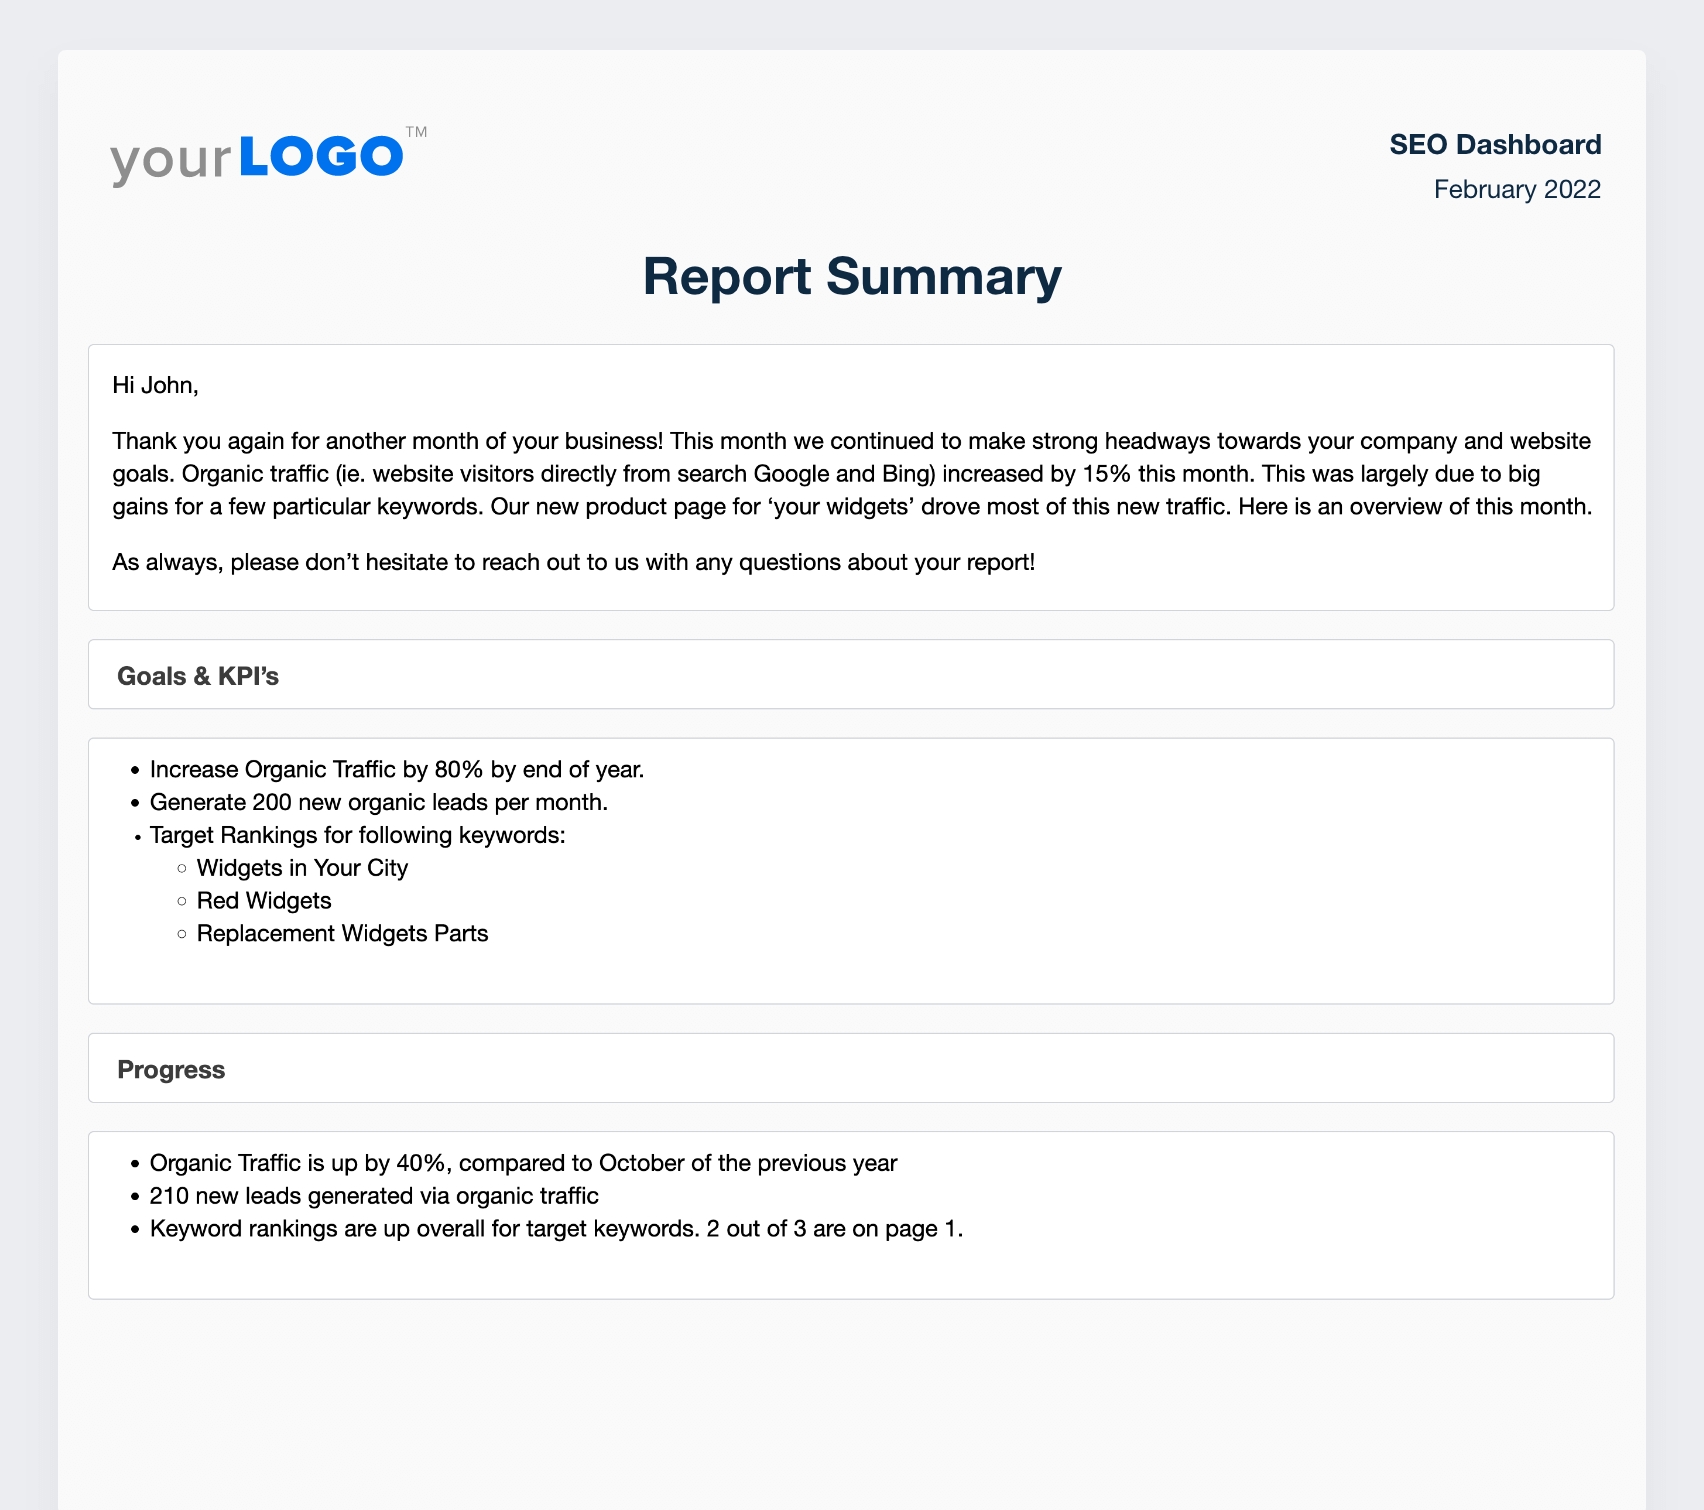 Building An Seo Report? Use Our 7 Section Template - Agencyanalytics inside Section 7 Report Template